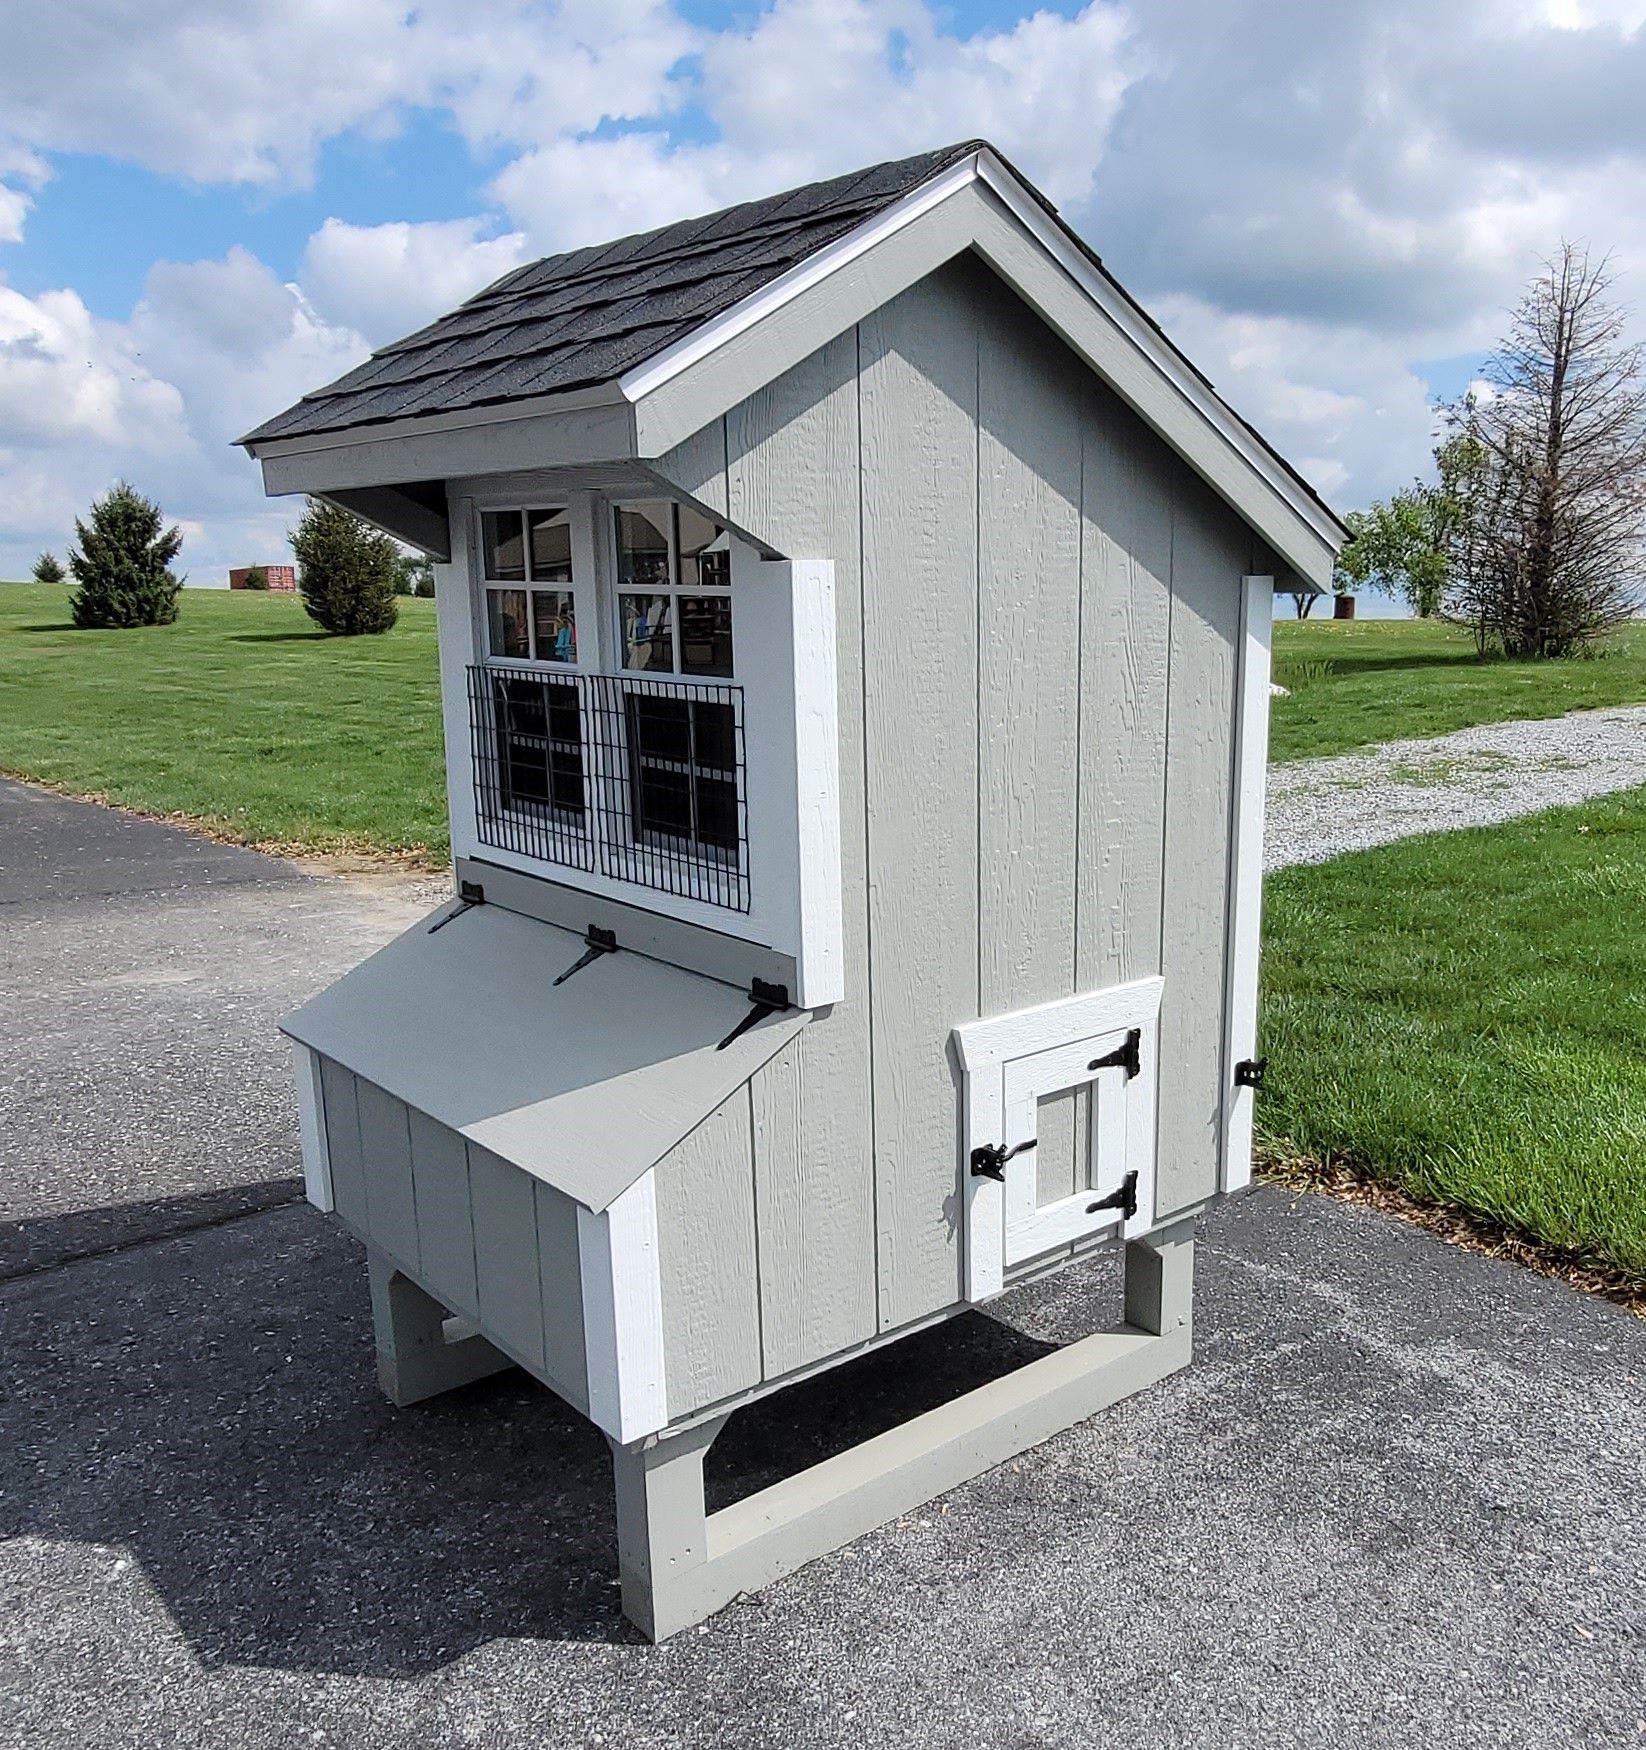 Coop Designs for Pond View Mini Structures in  Strasburg, PA